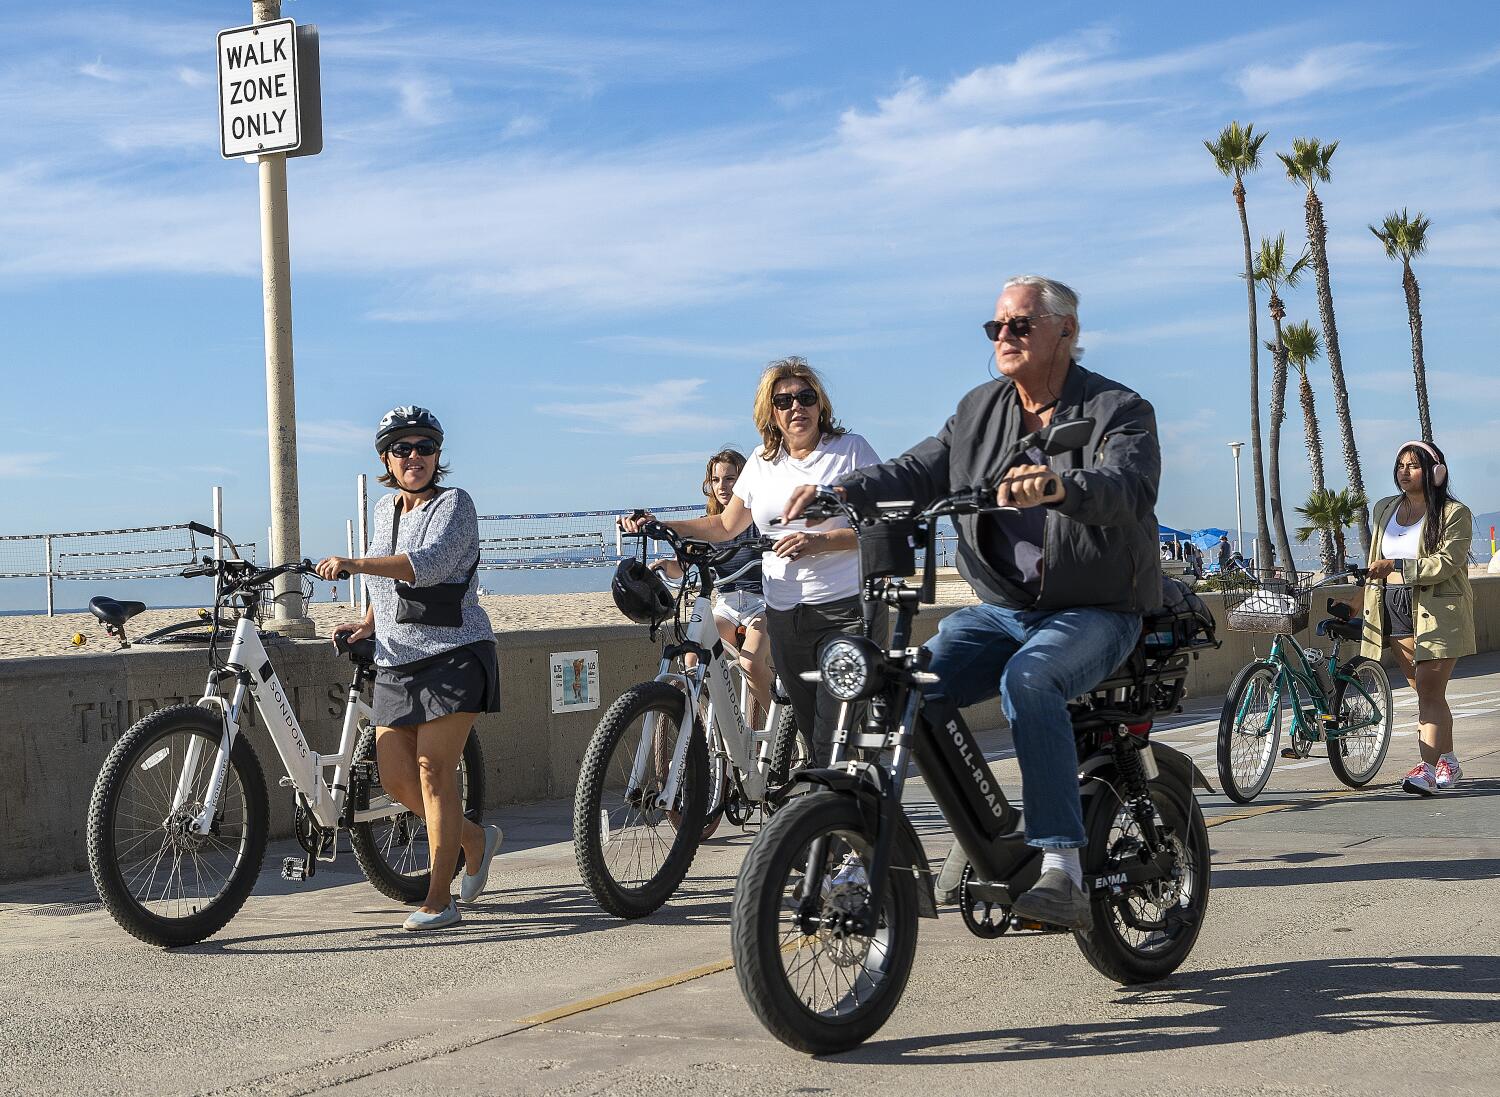 In the South Bay, e-bikes are restricted along the beach. Yet they're still everywhere